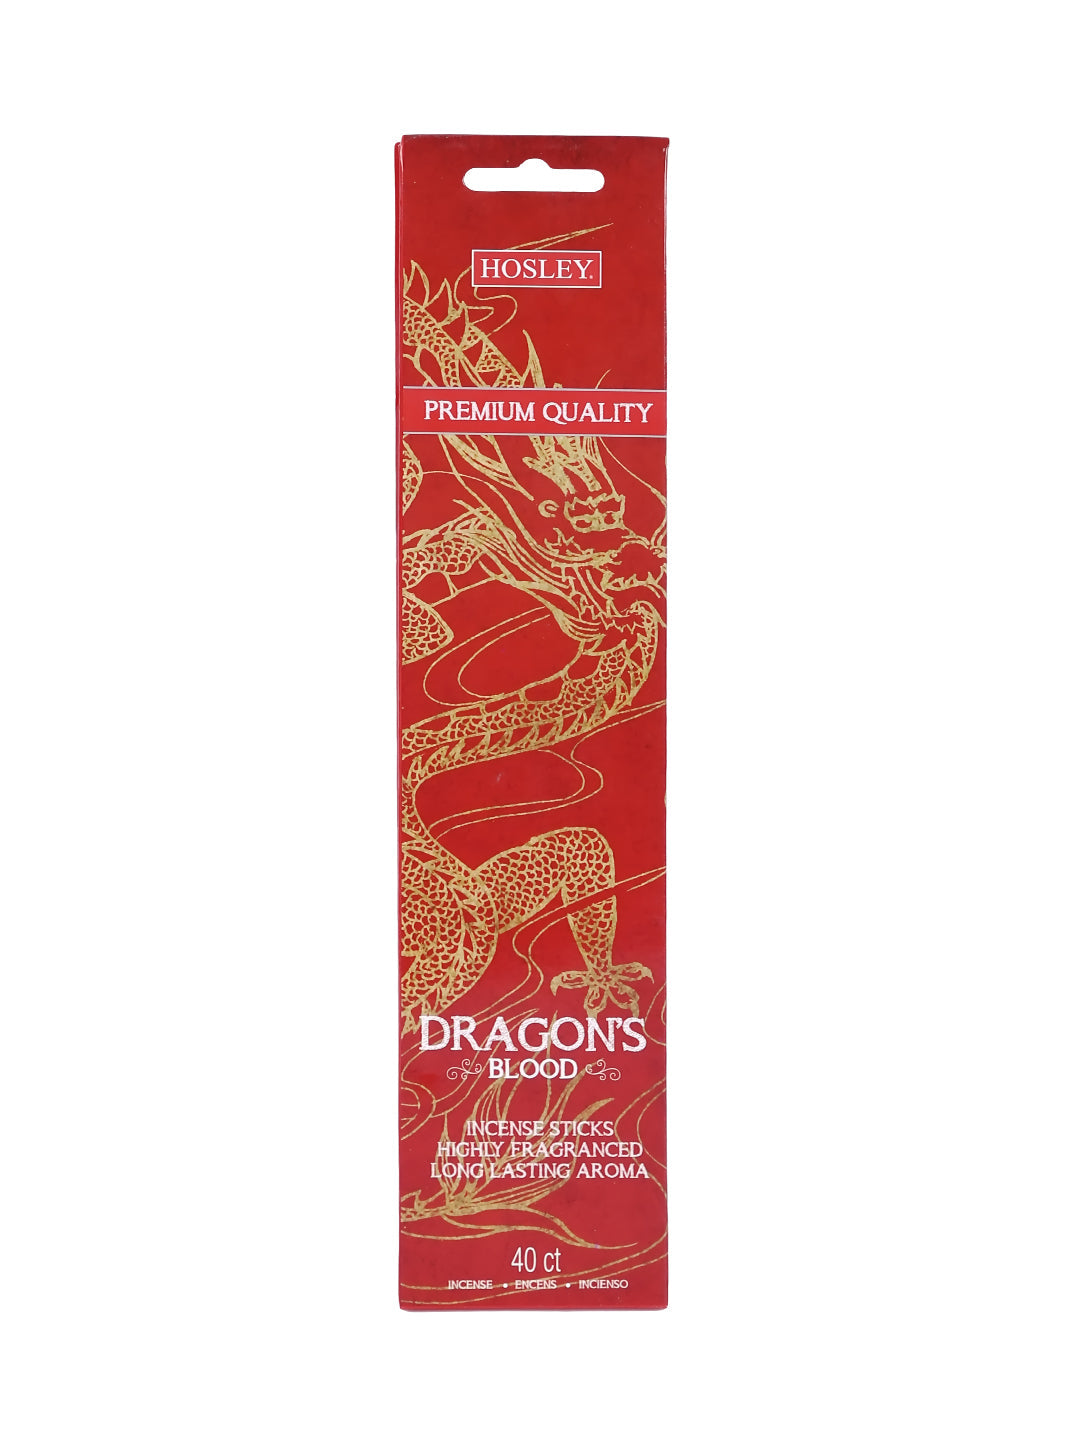 Set of 240 Highly Fragranced Hosley® Dragon Blood Incense Sticks (packed in forty piece count boxes) with bonus Decorative Butterfly Shaped Wooden Holder